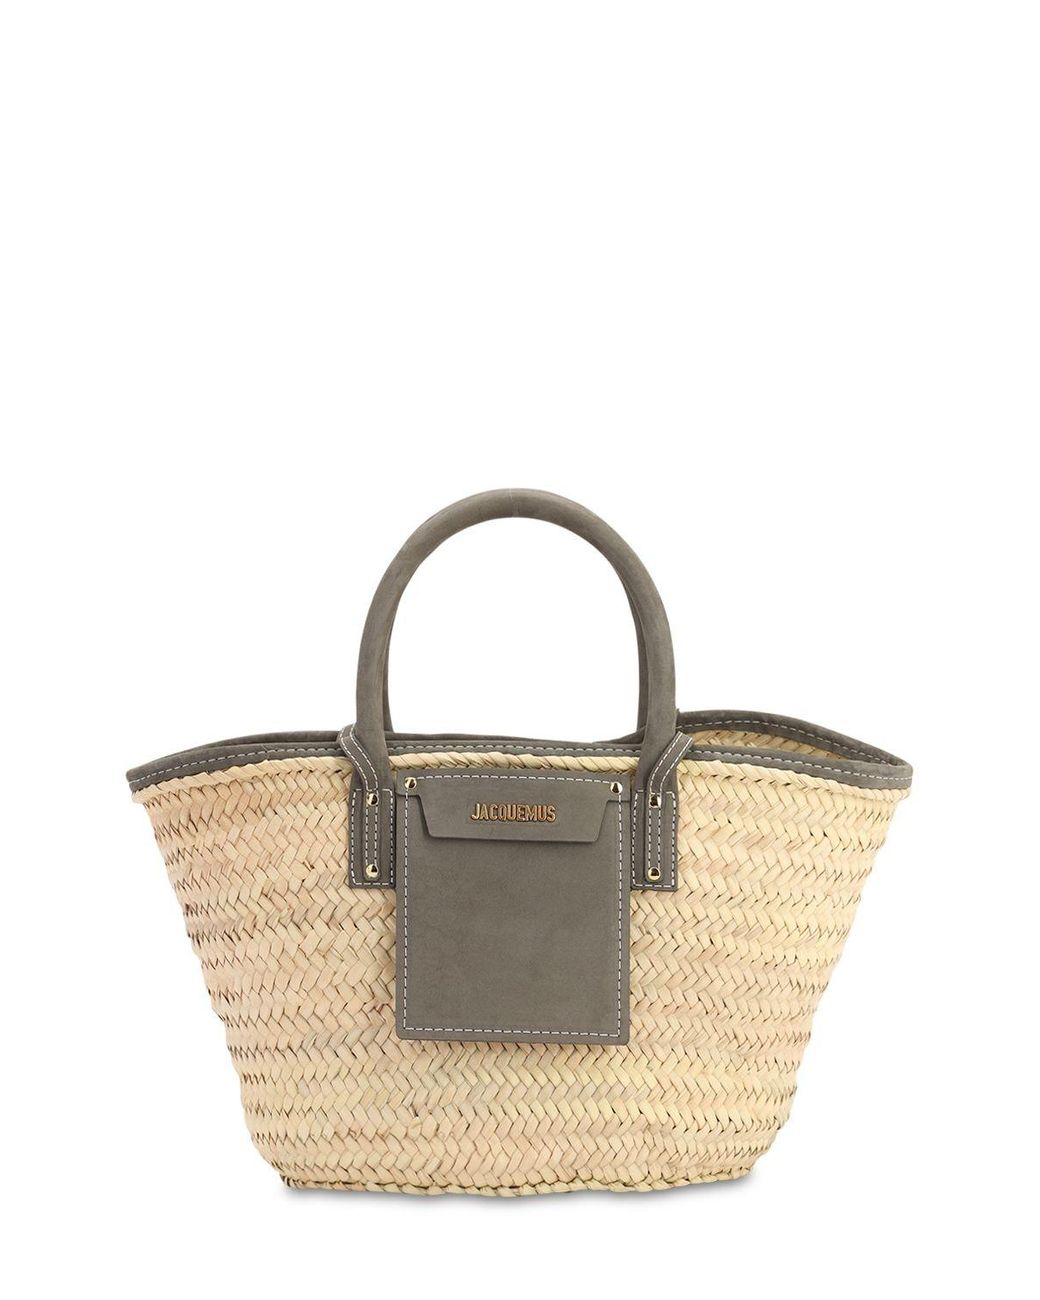 Jacquemus Le Panier Soleil Straw & Leather Bag in Dark Grey (Gray) - Lyst